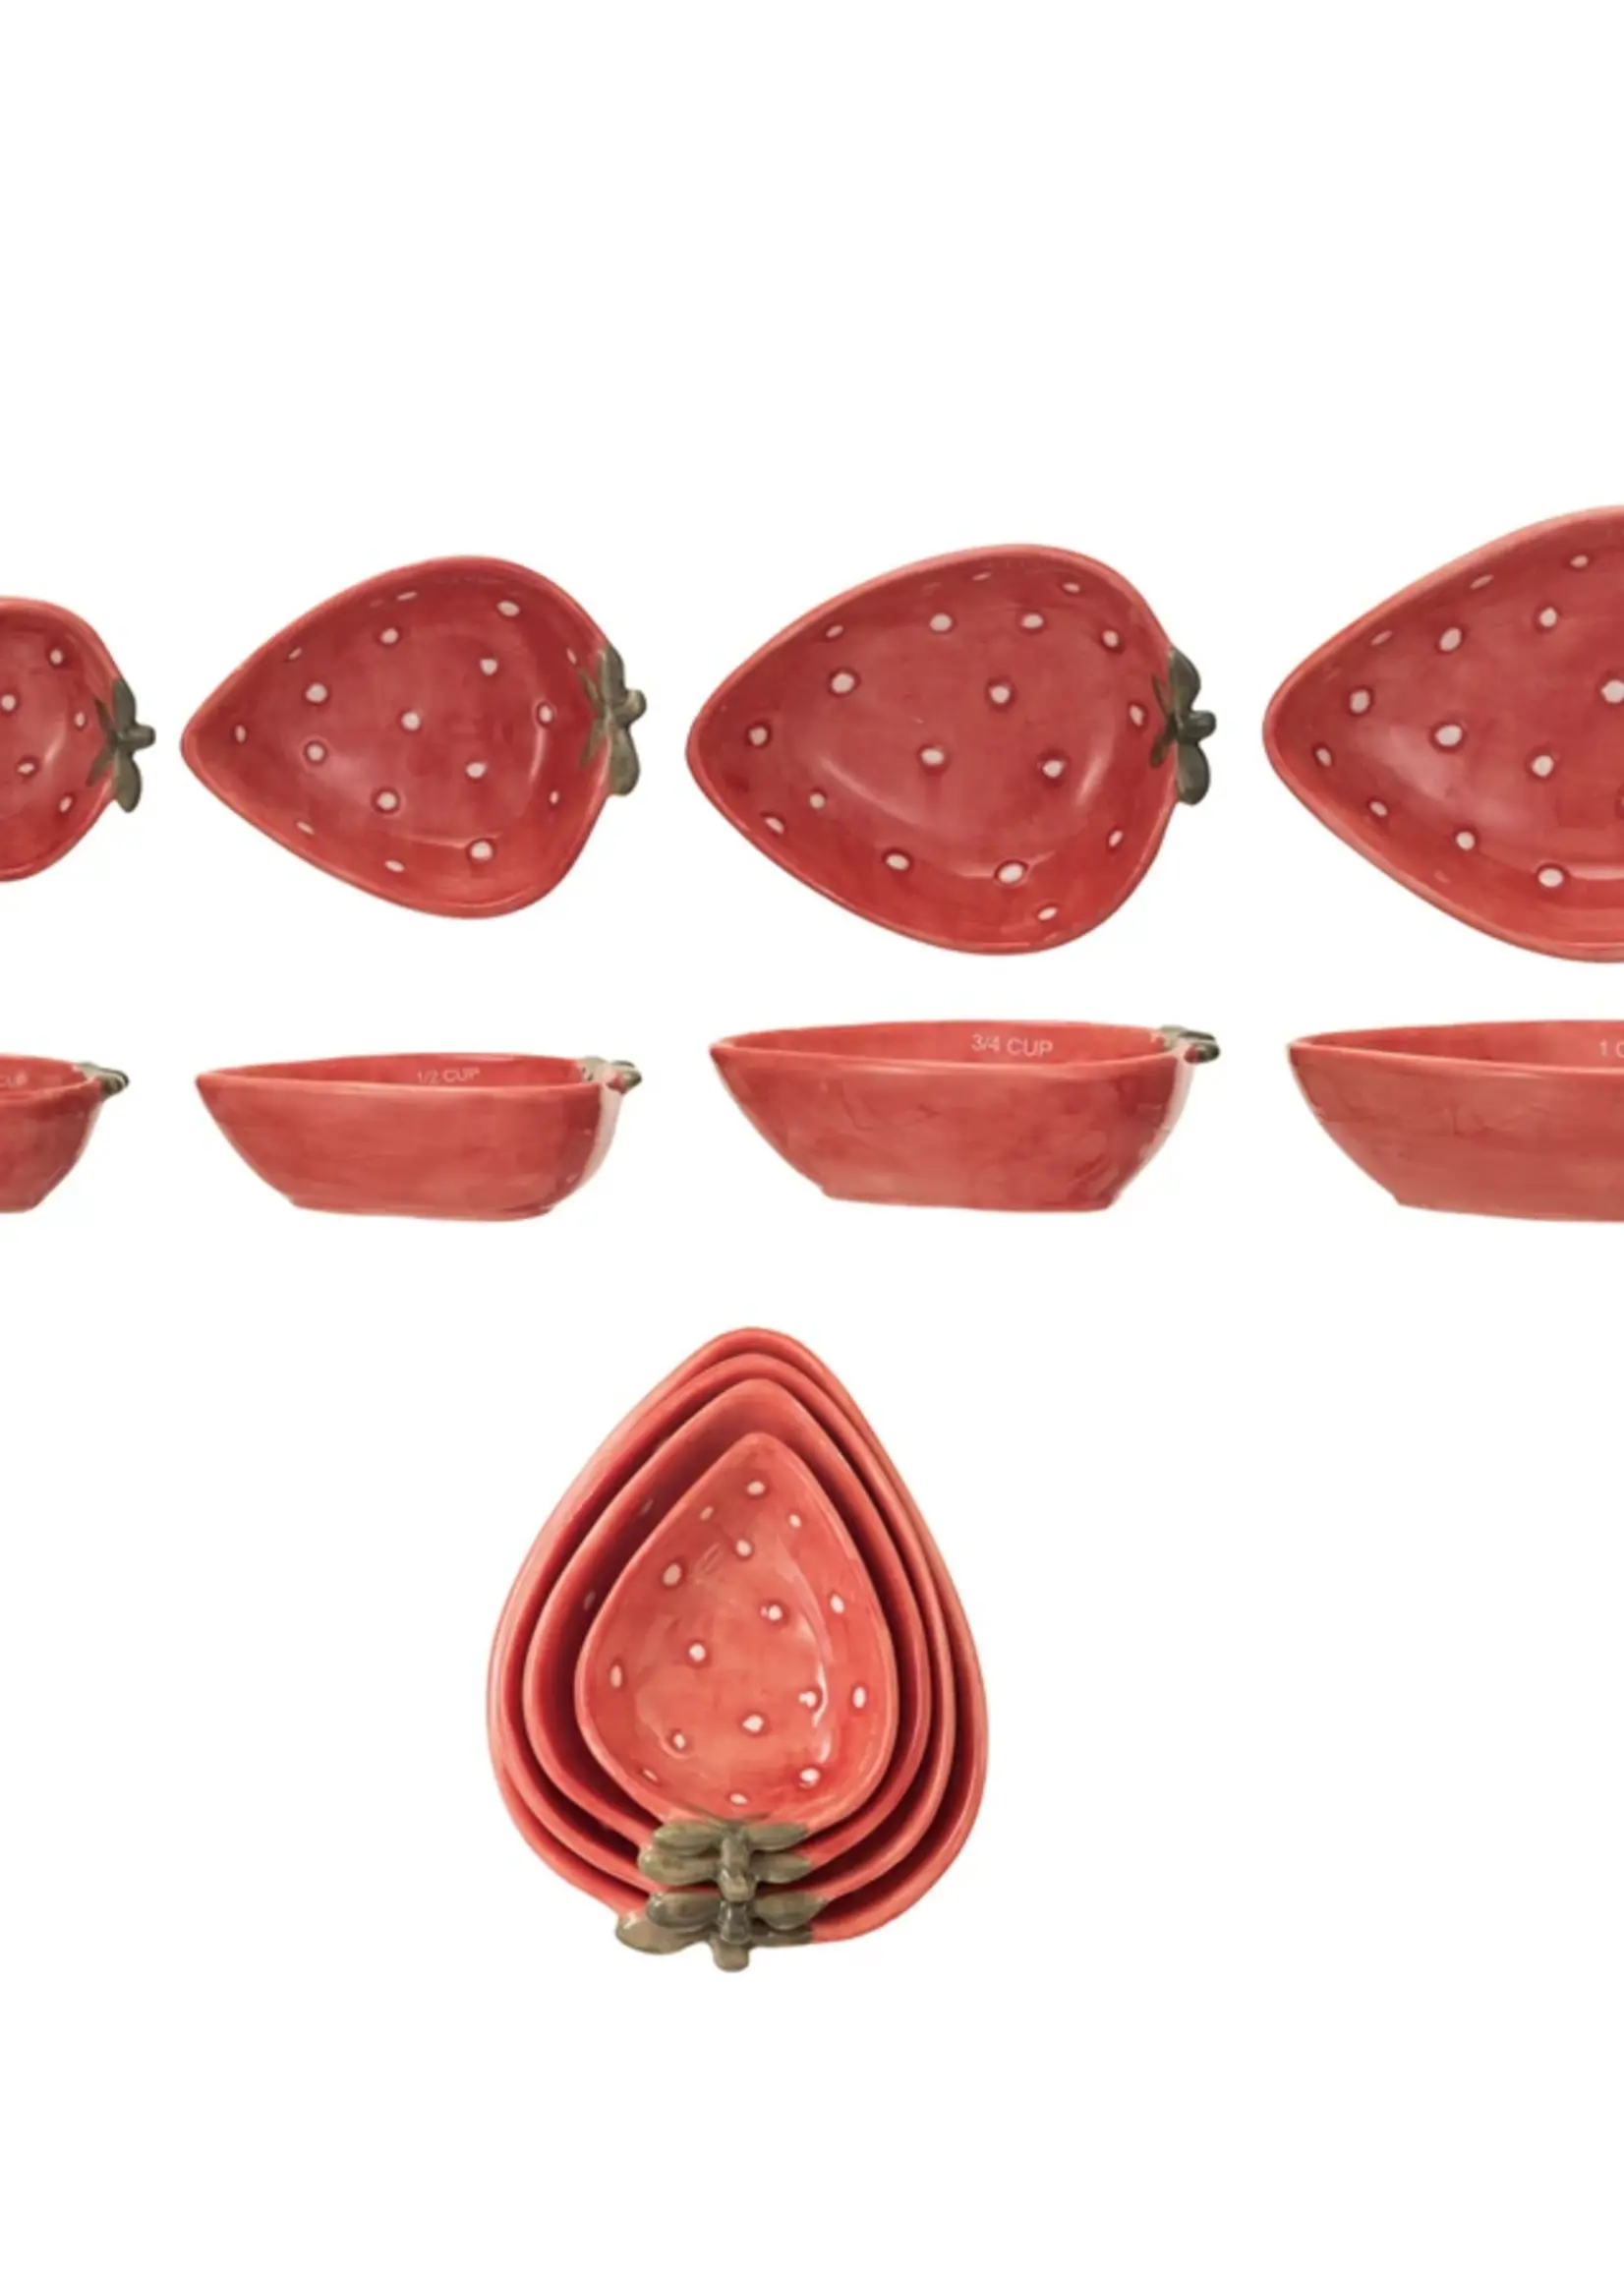 Creative Co-Op 1, 3/4, 1/2 & 1/4 Cup Hand-Painted Strawberry Shaped Measuring Cups, Set of 4